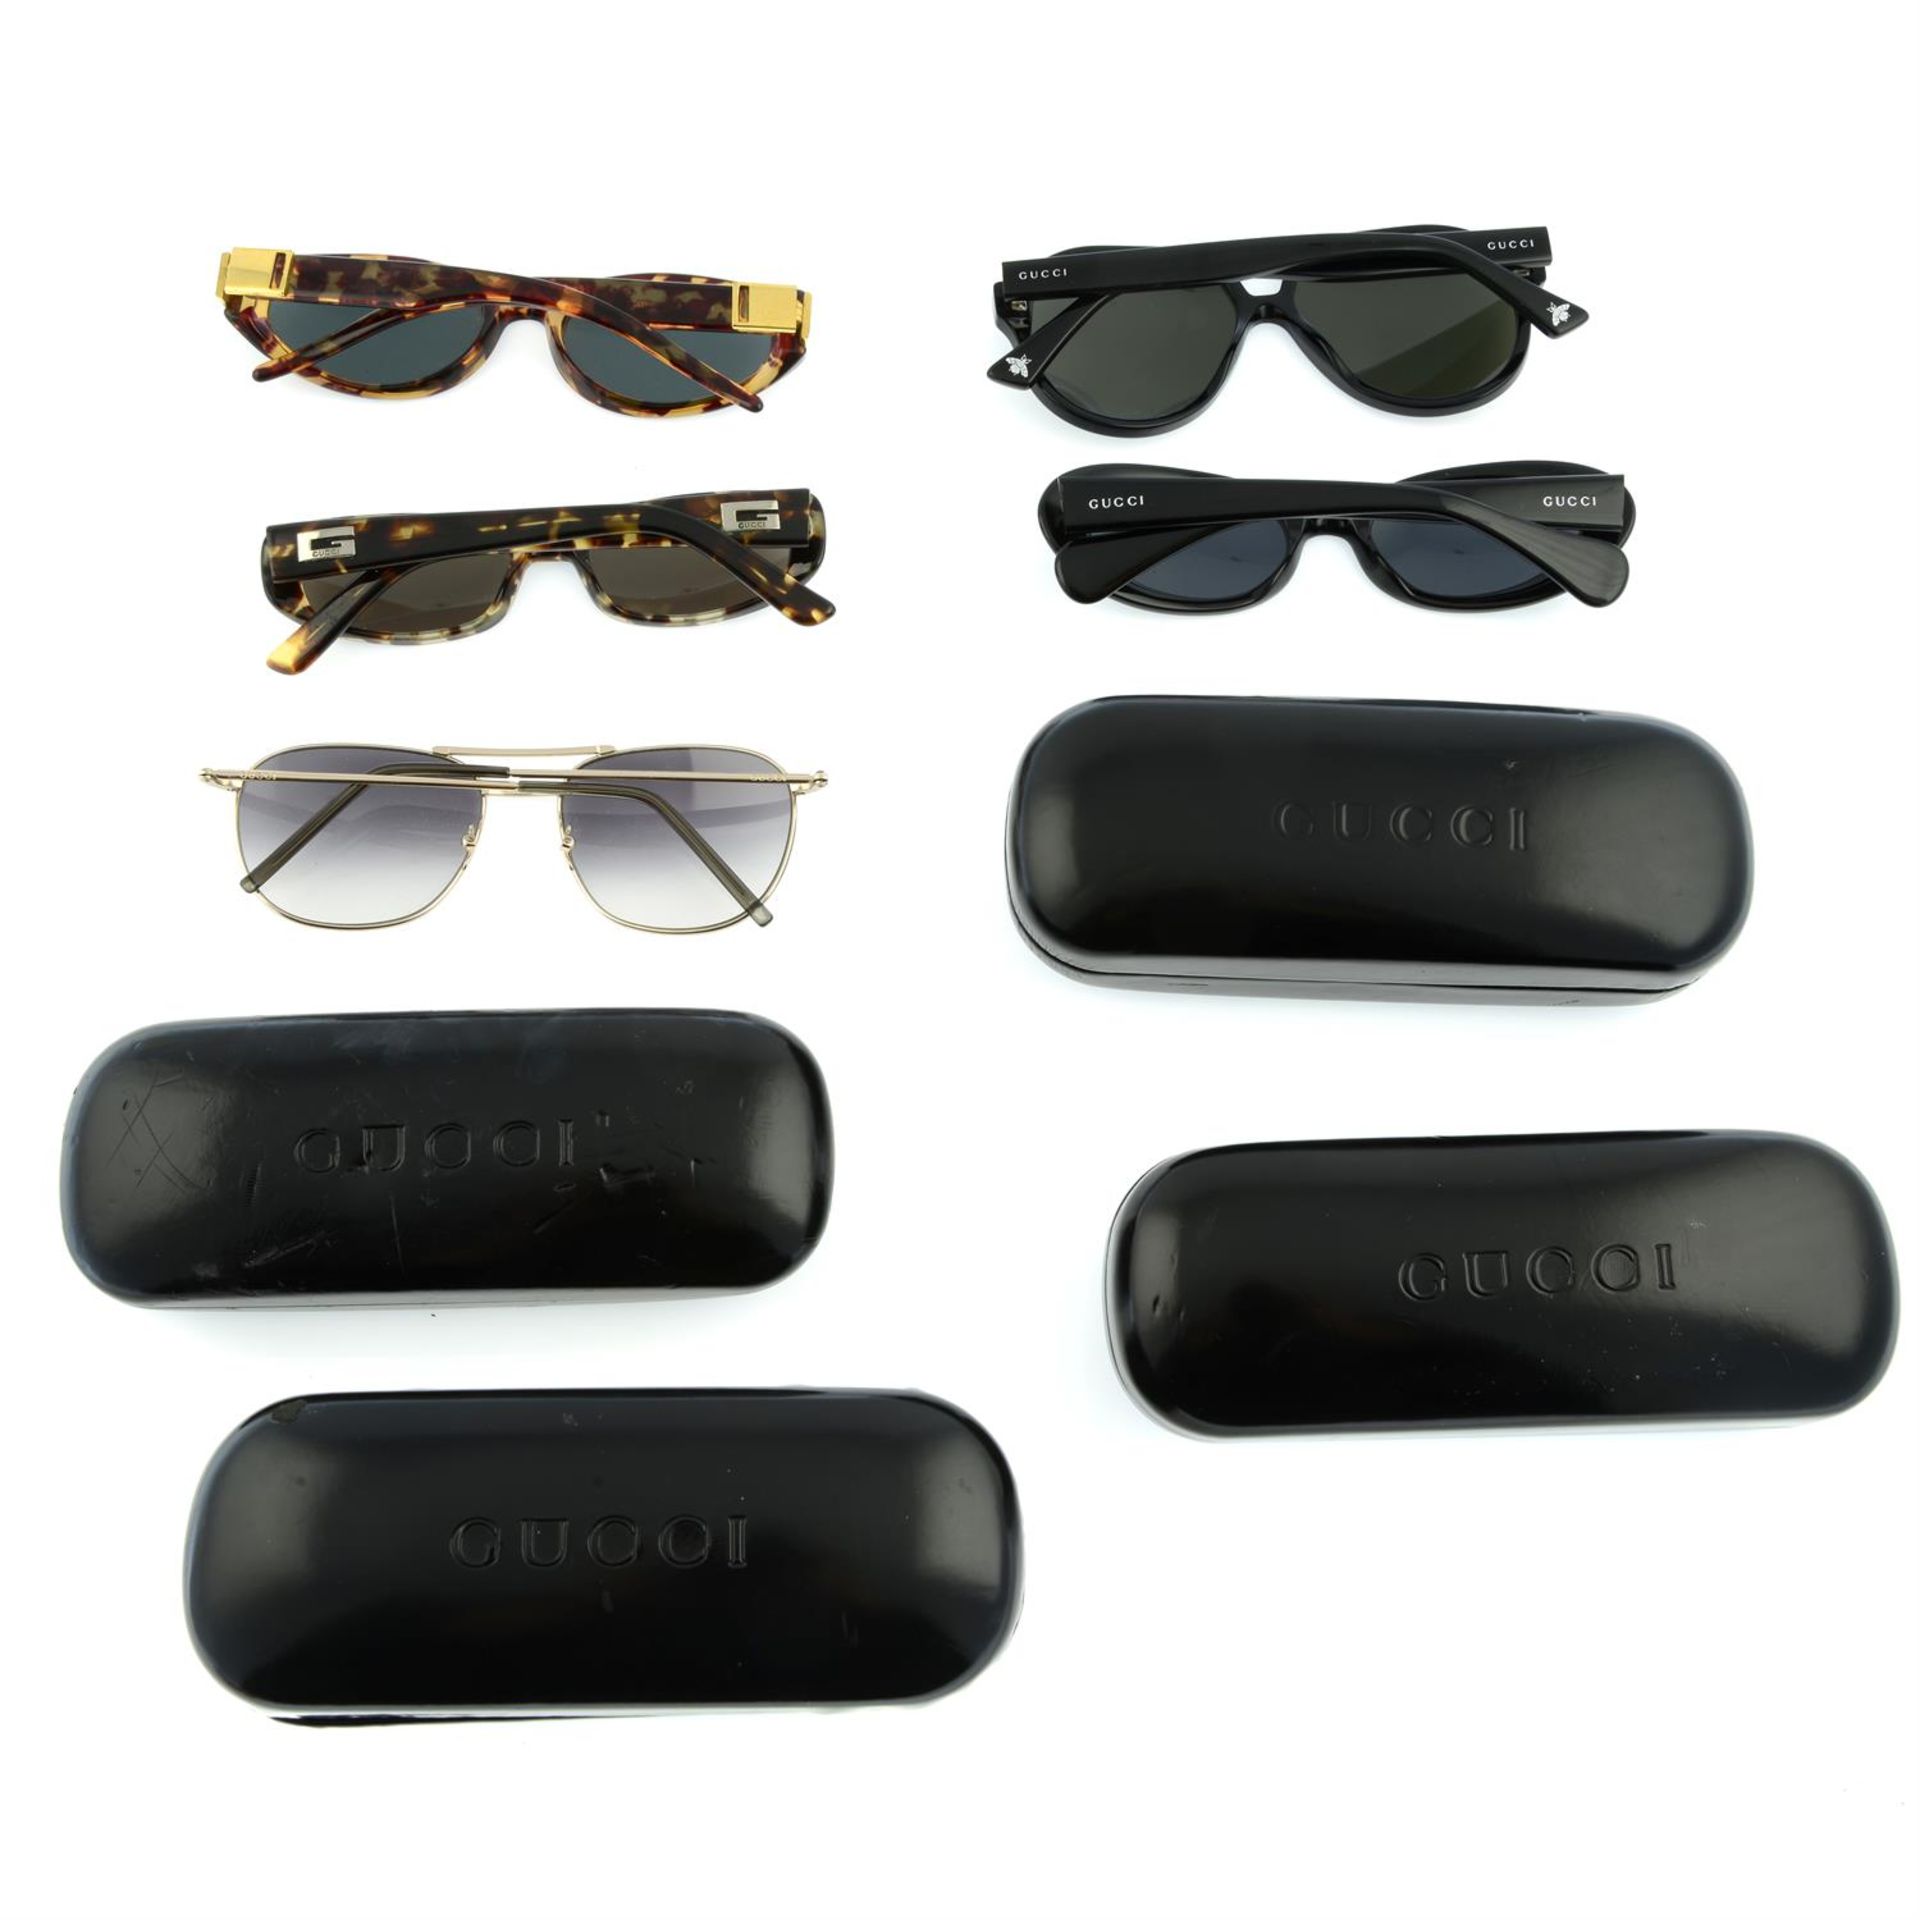 GUCCI - five pairs of sunglasses. - Image 2 of 2